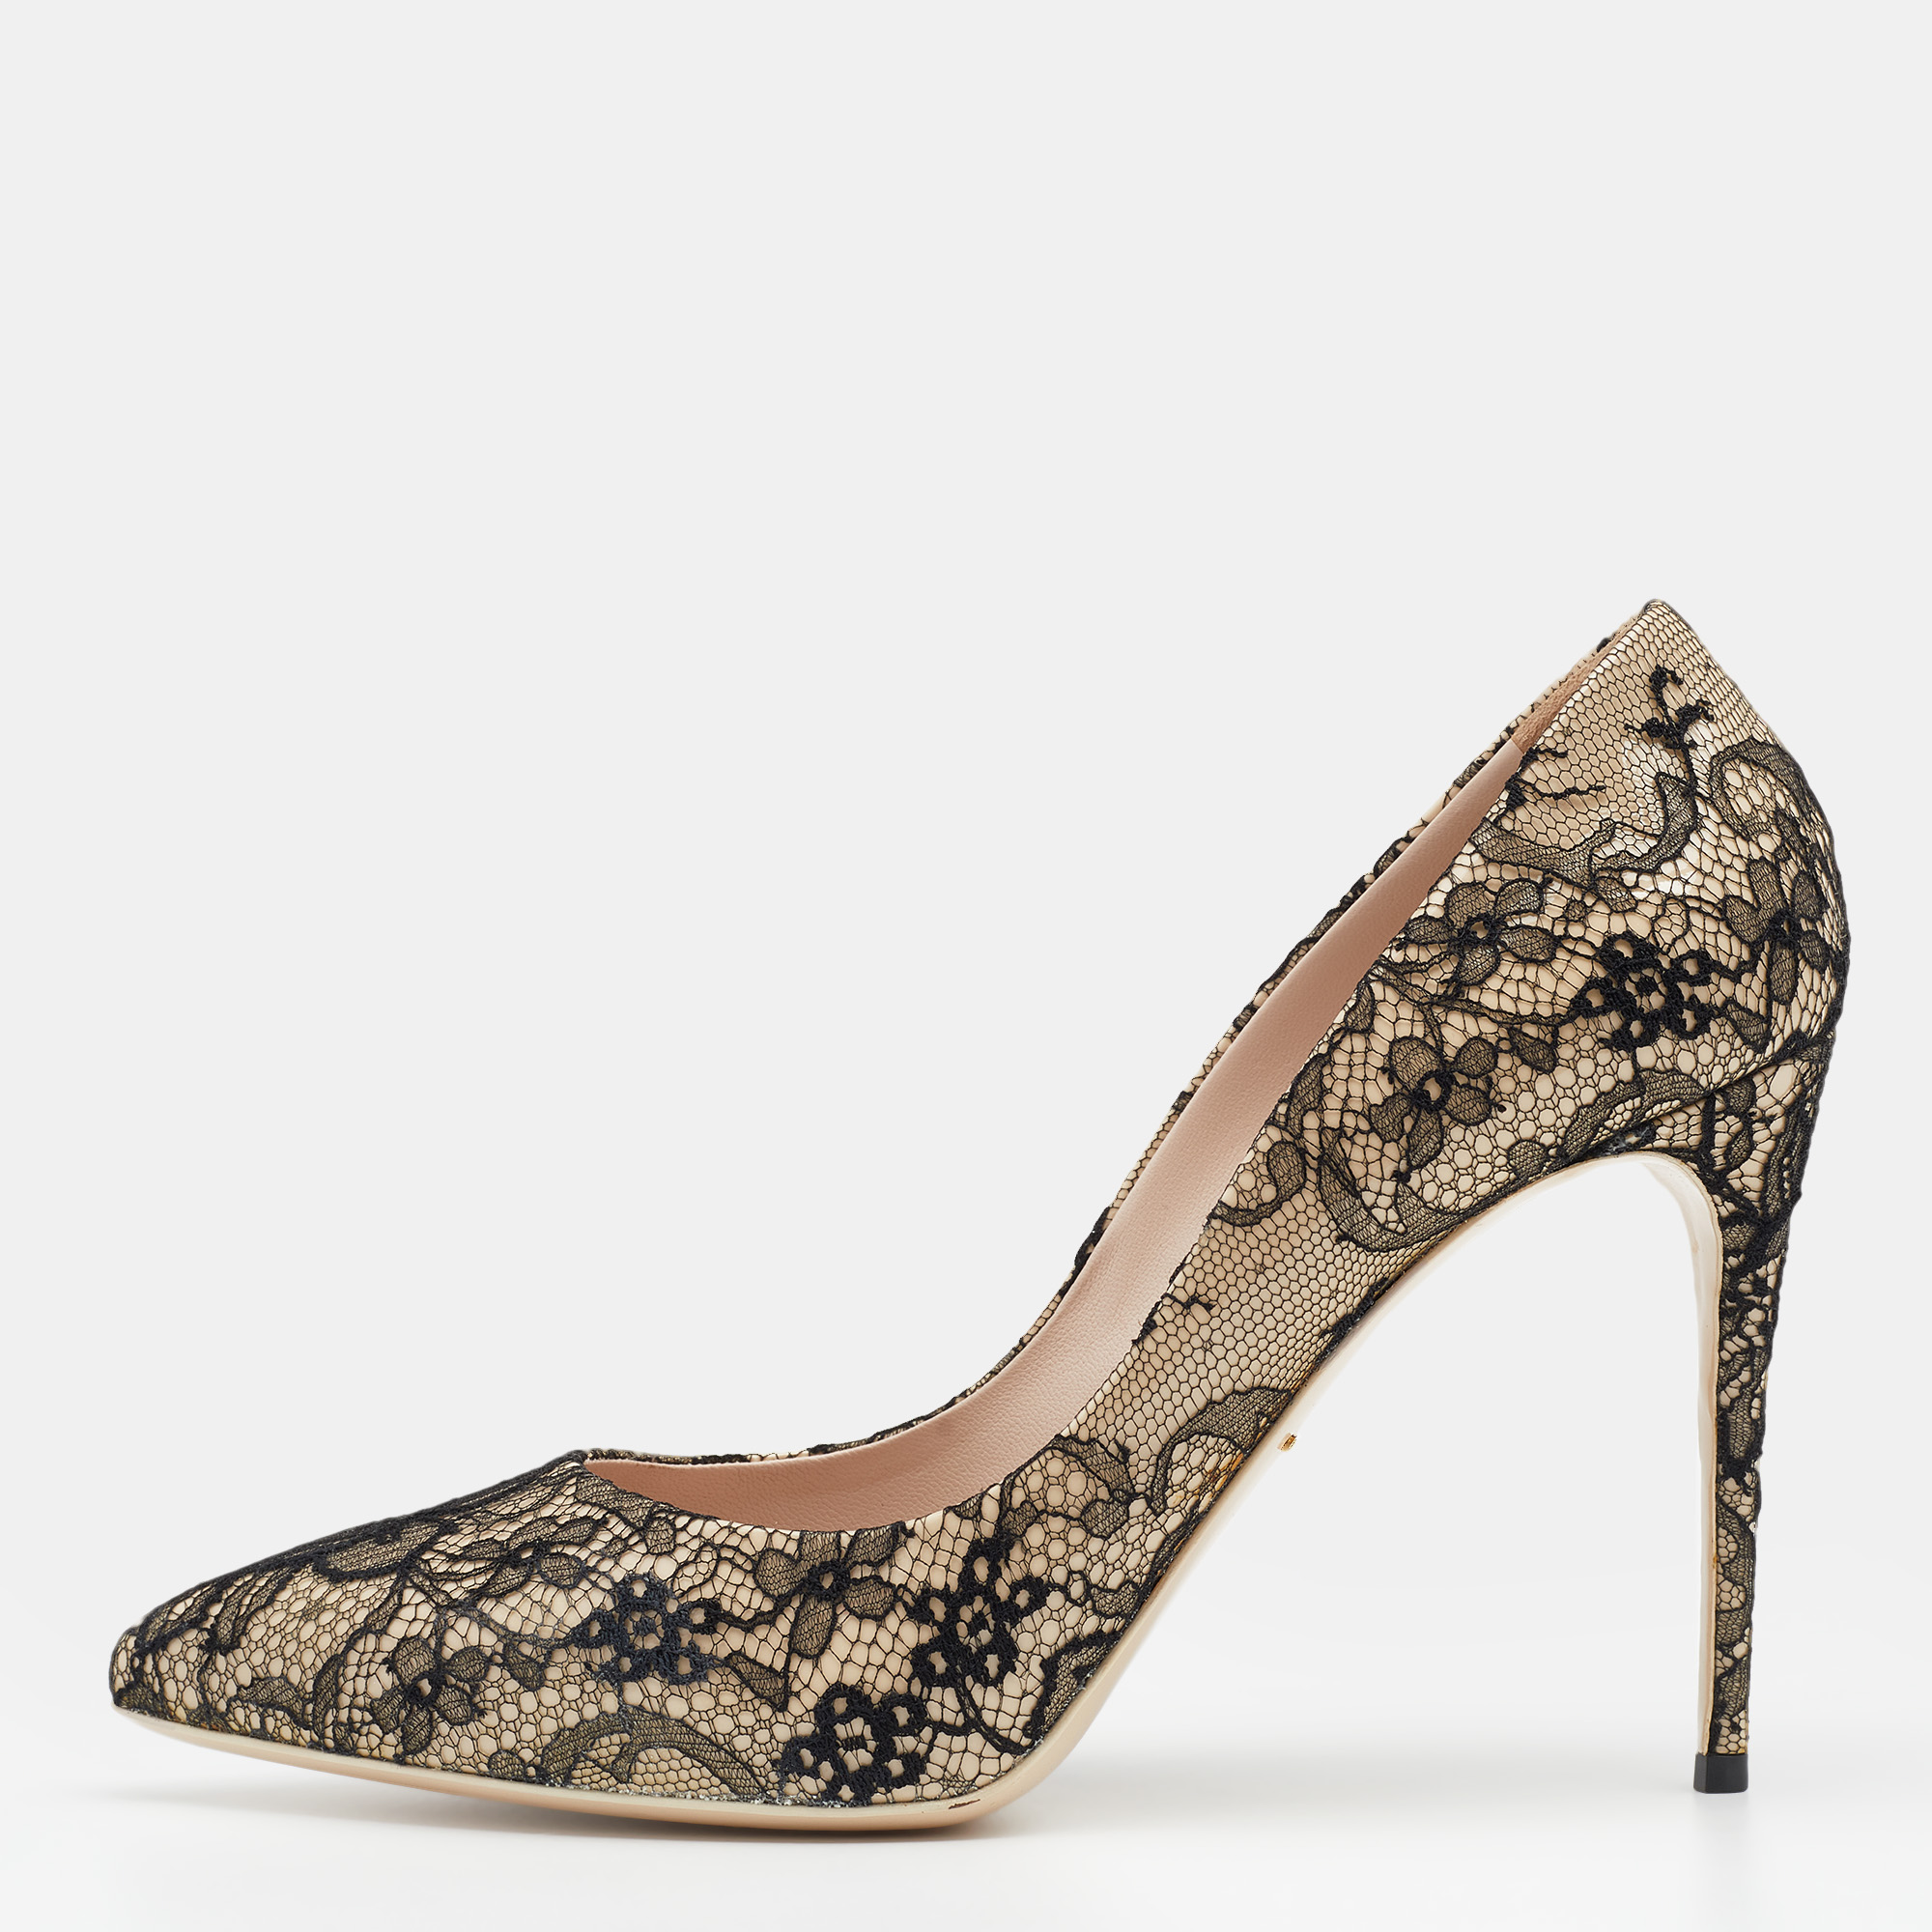 Dolce & gabbana black/beige floral lace and patent leather pointed toe pumps size 40